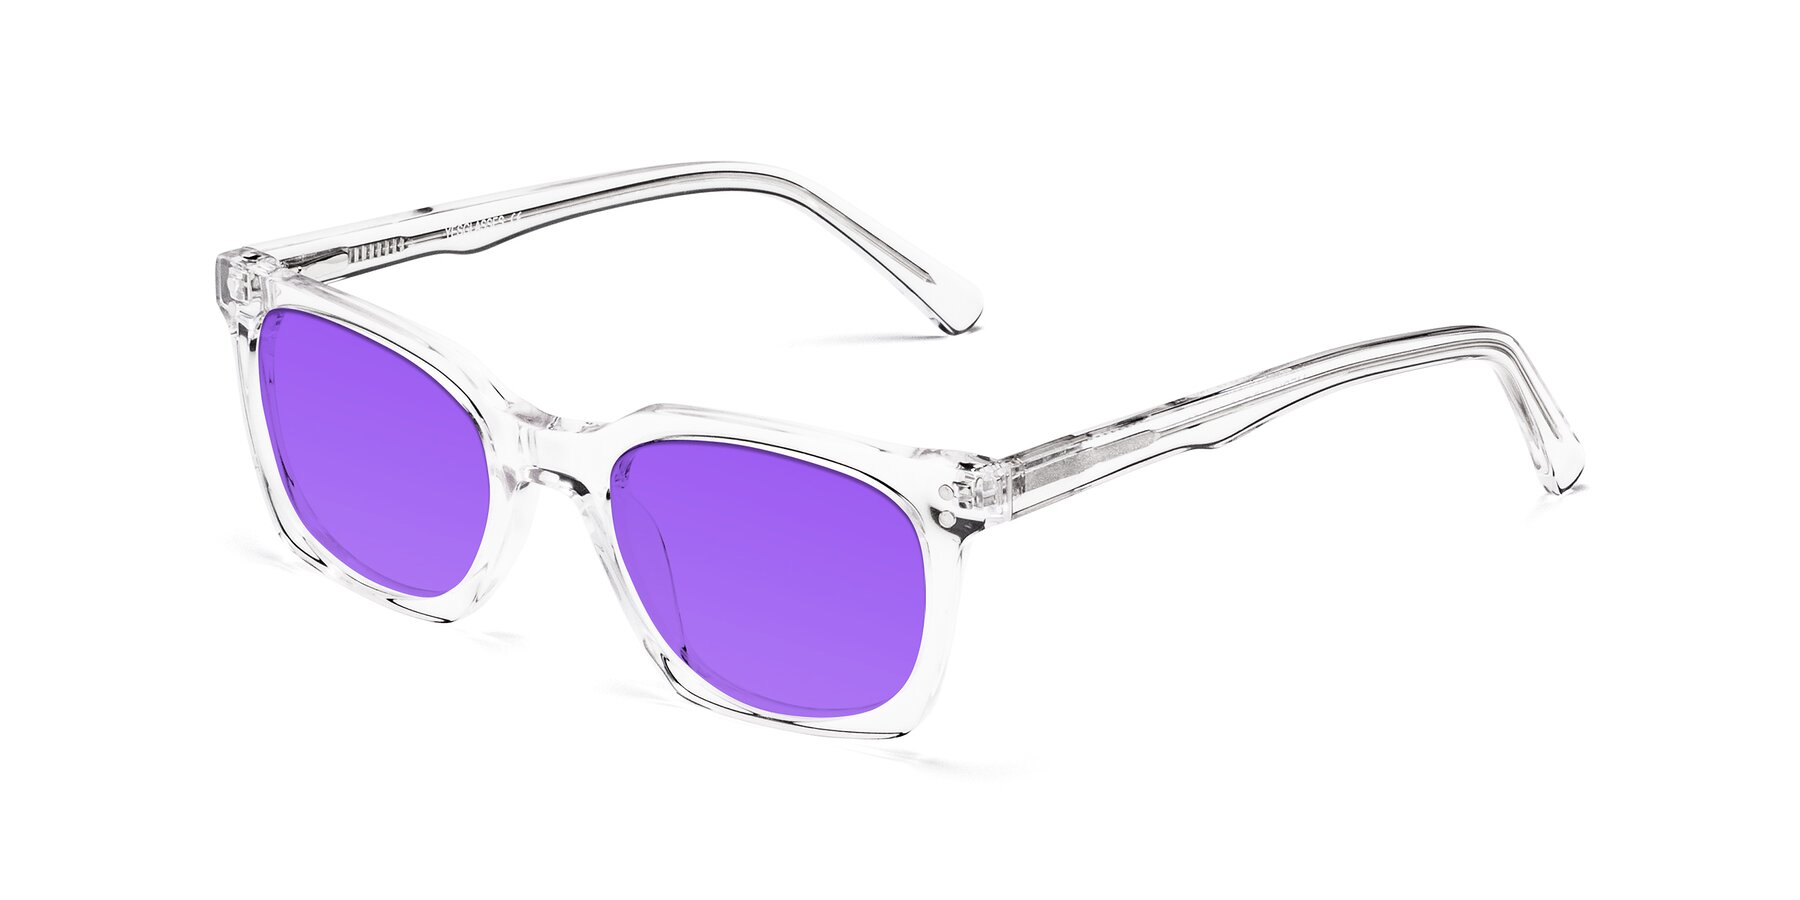 Translucent Gray Thick Geek-Chic Geometric Tinted Sunglasses with Light Yellow Sunwear Lenses